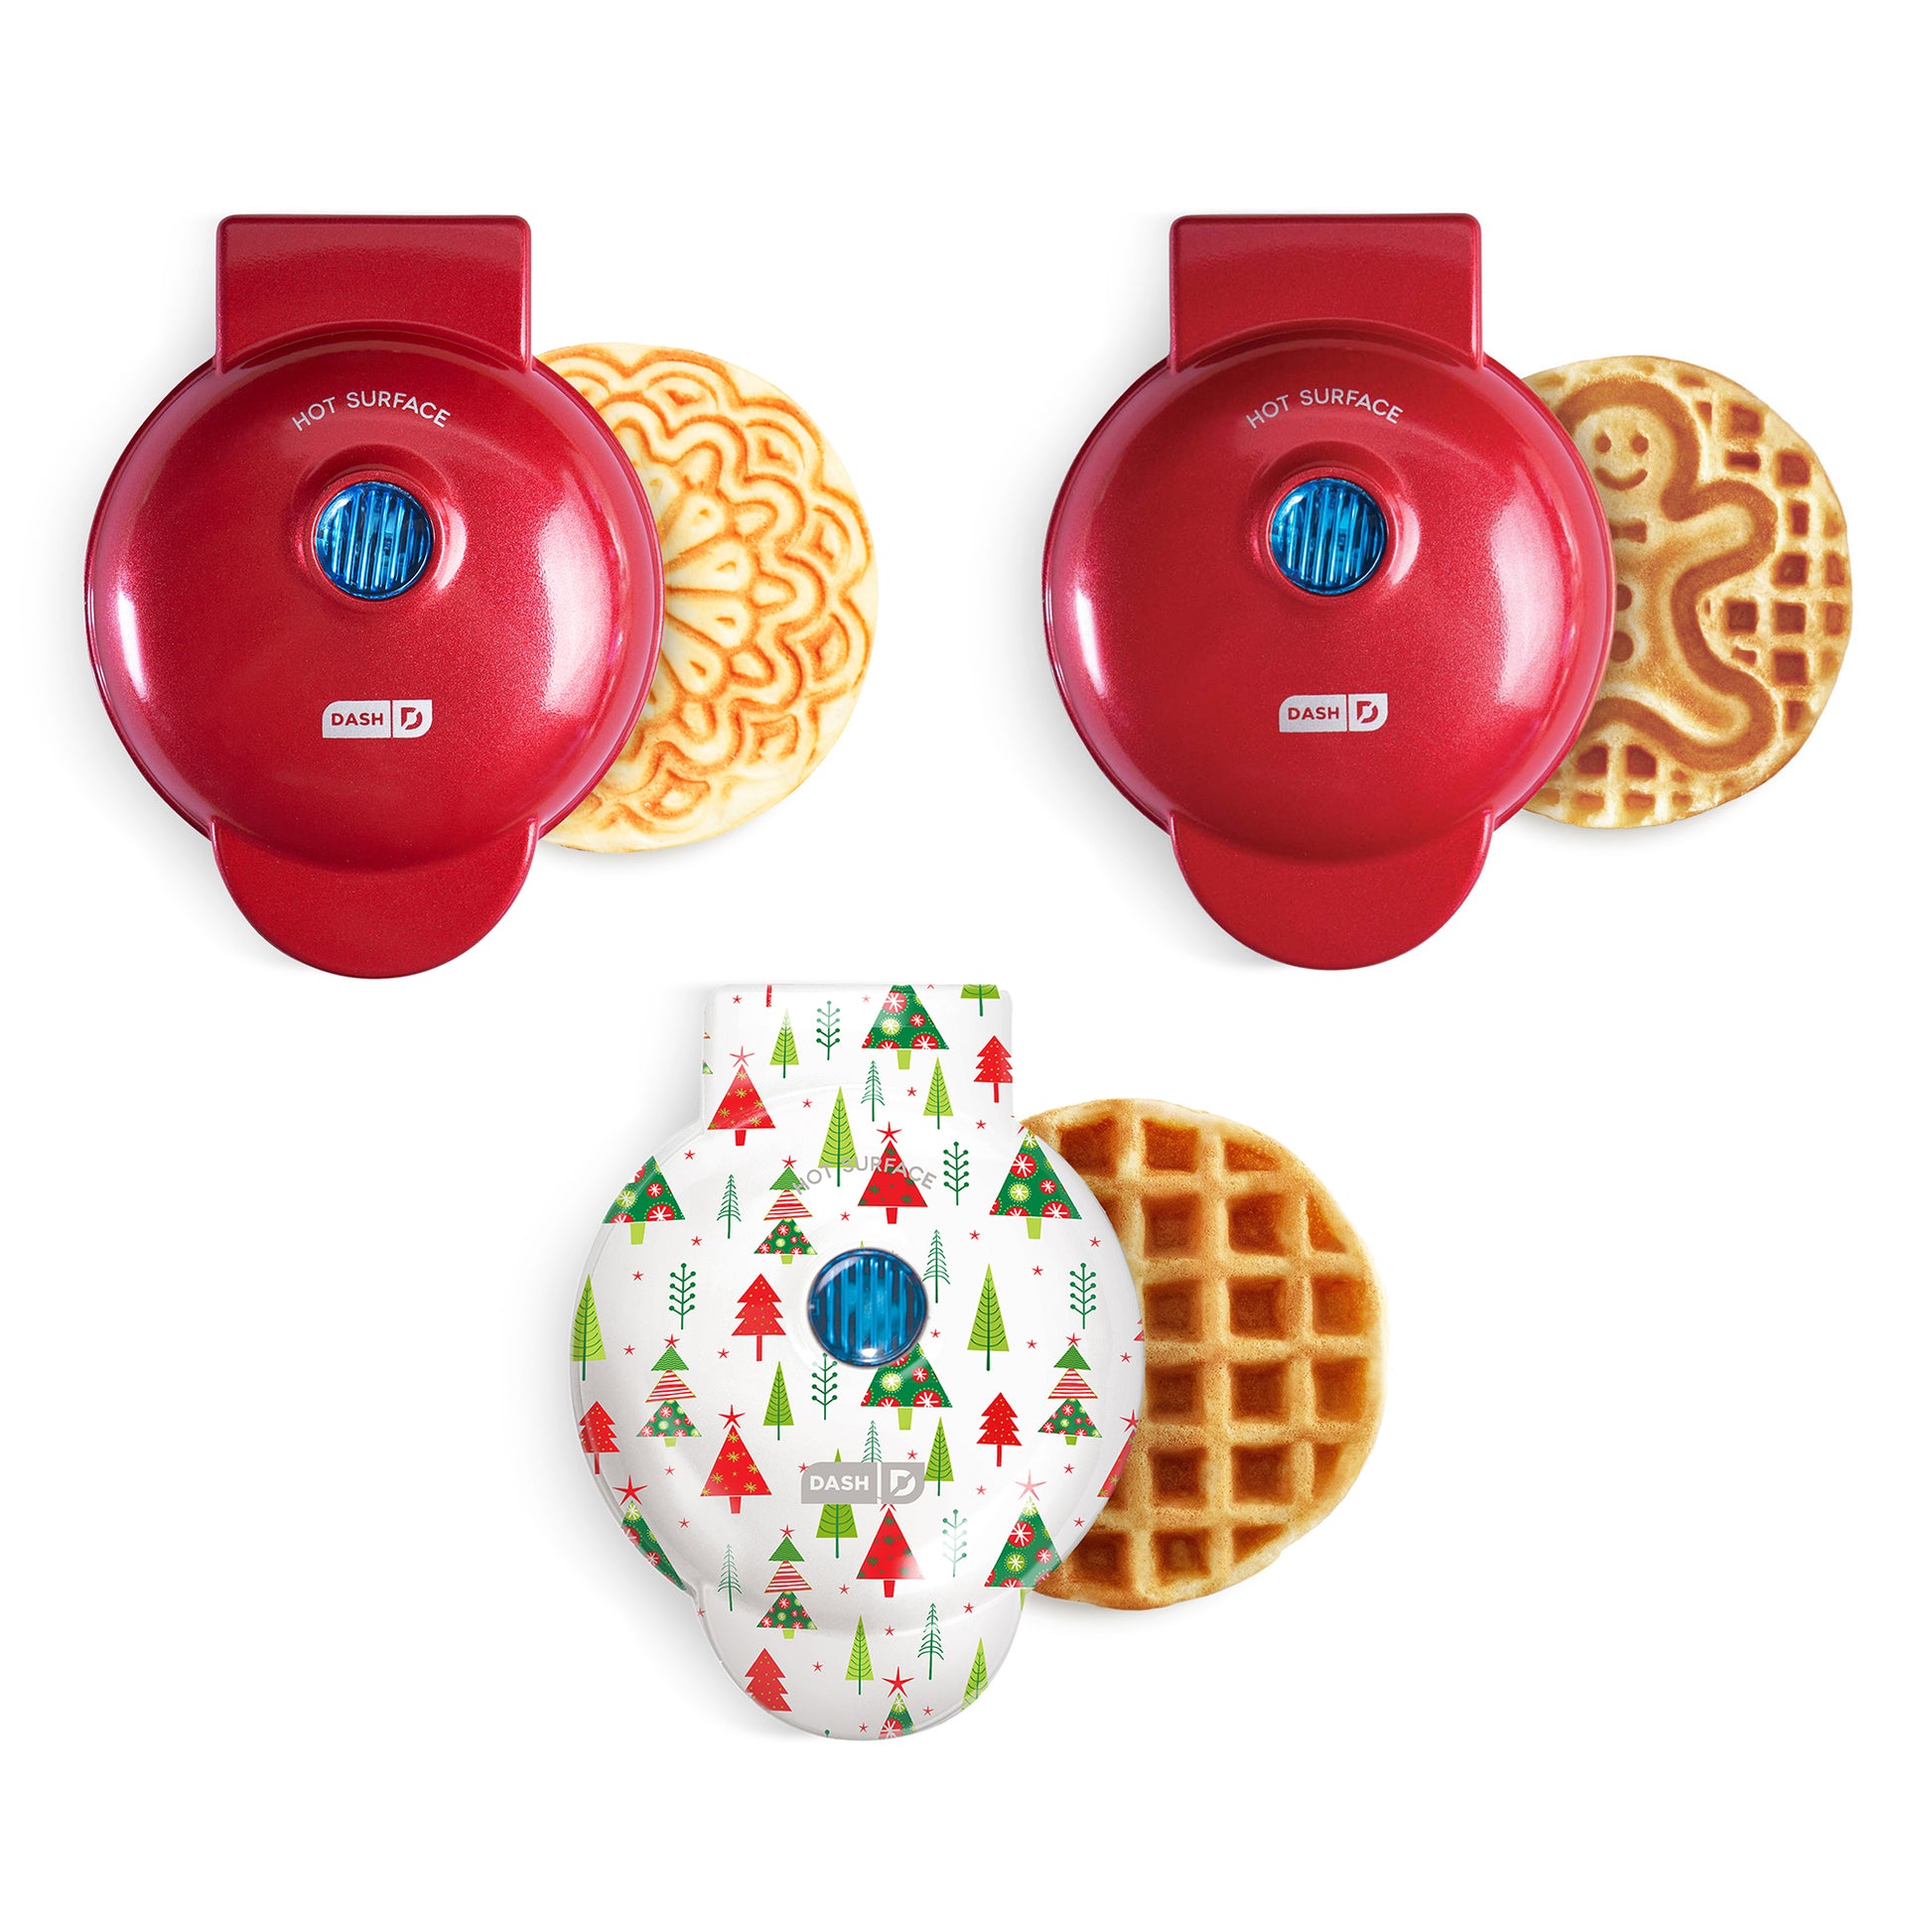 You Can Have Snowflake and Gingerbread Waffles With This Cute Dash Set